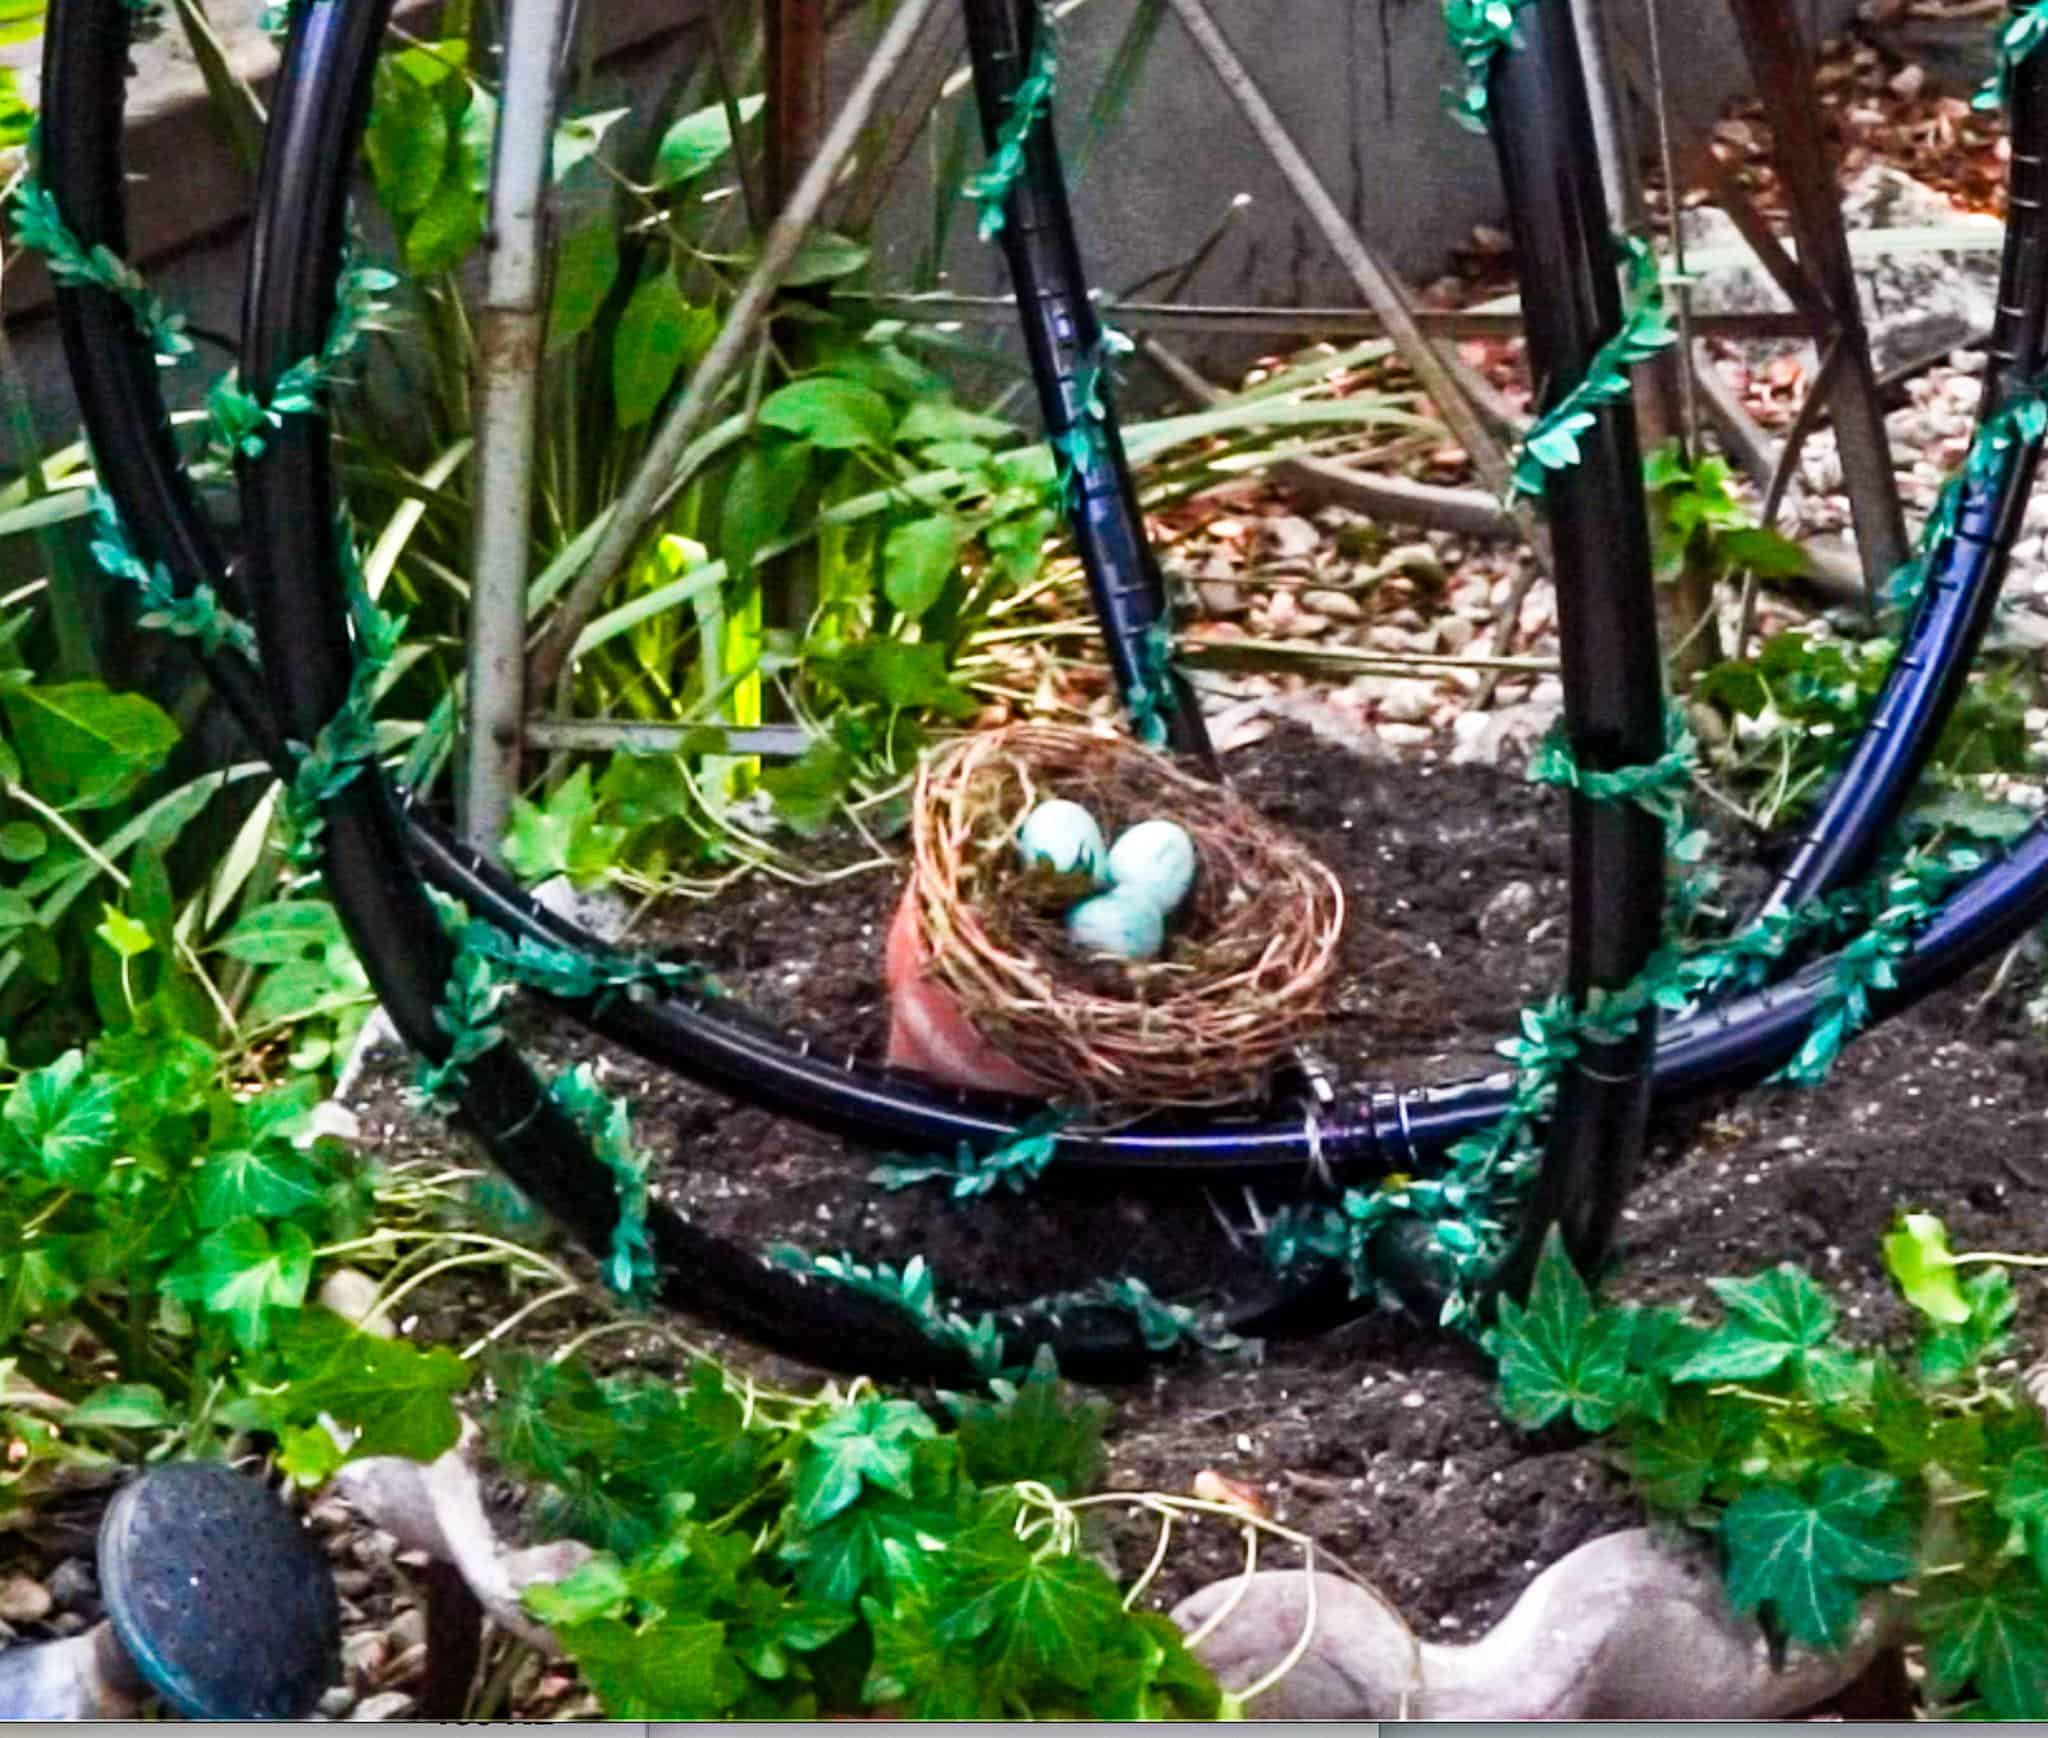 Covering the light switches of the lighted garden spheres with a bird nest